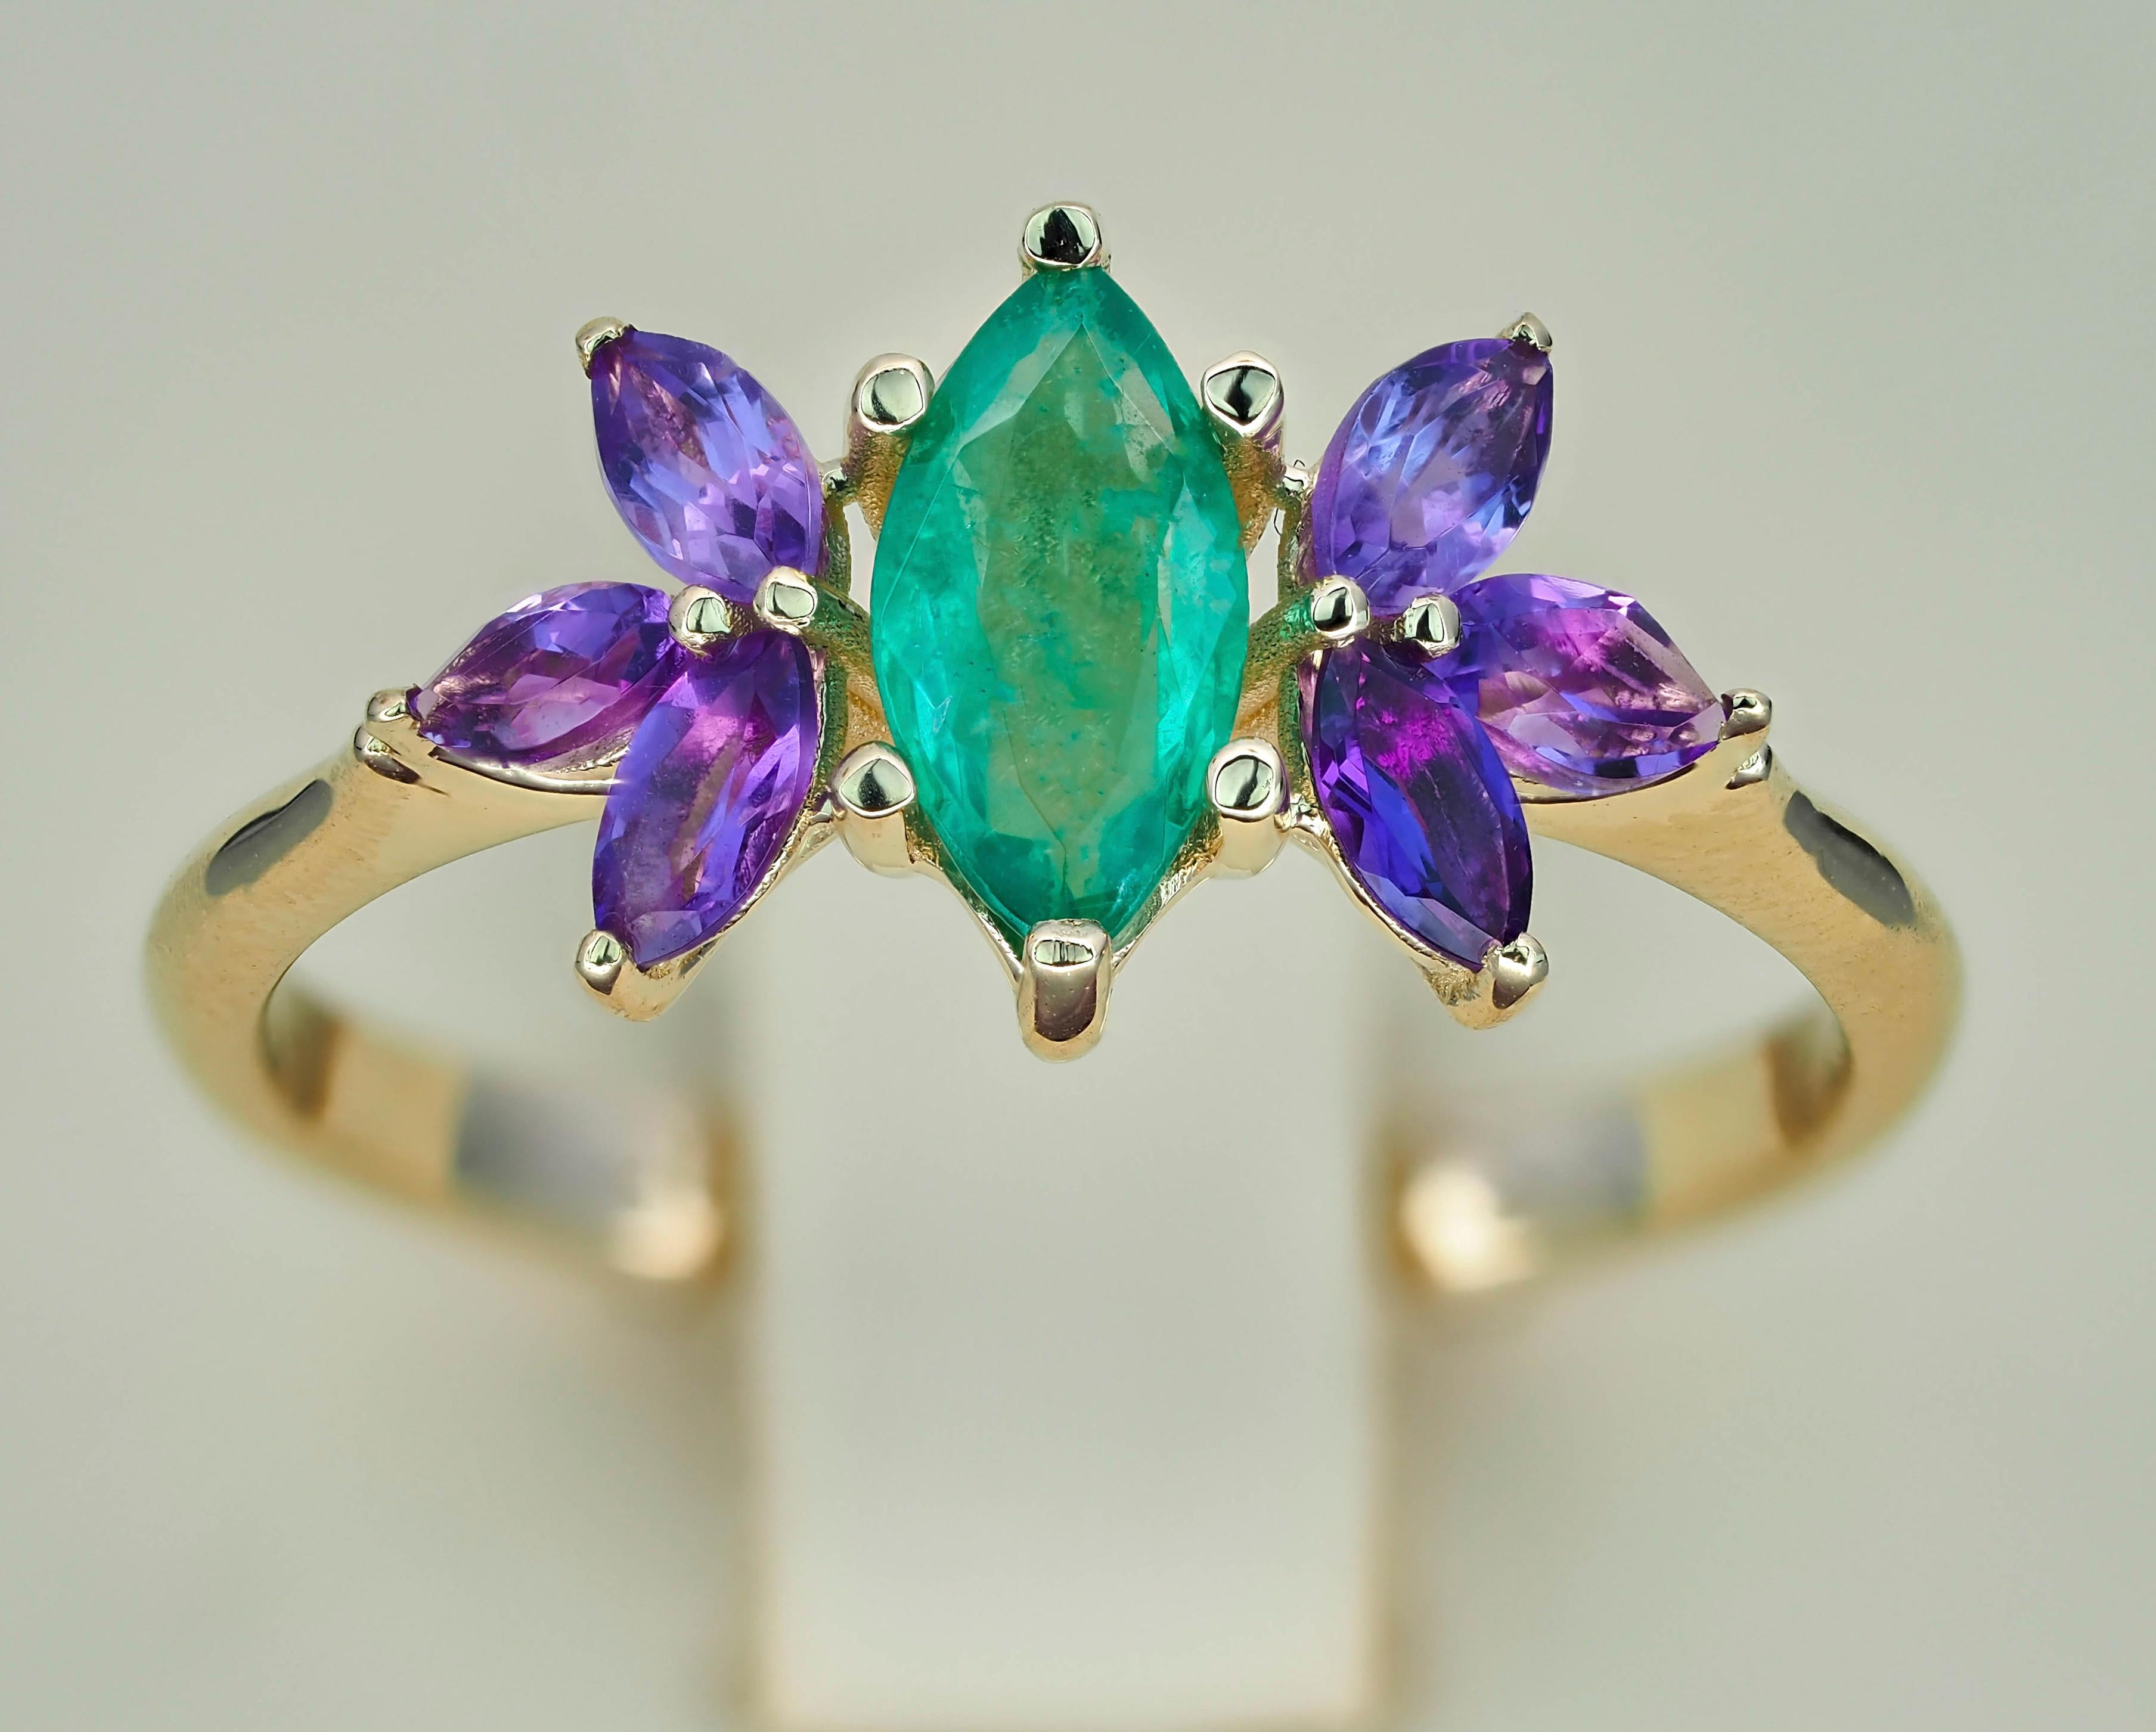 For Sale:  Emerald gold ring. 14k Gold Ring with Marquise Emerald and Amethysts.  8